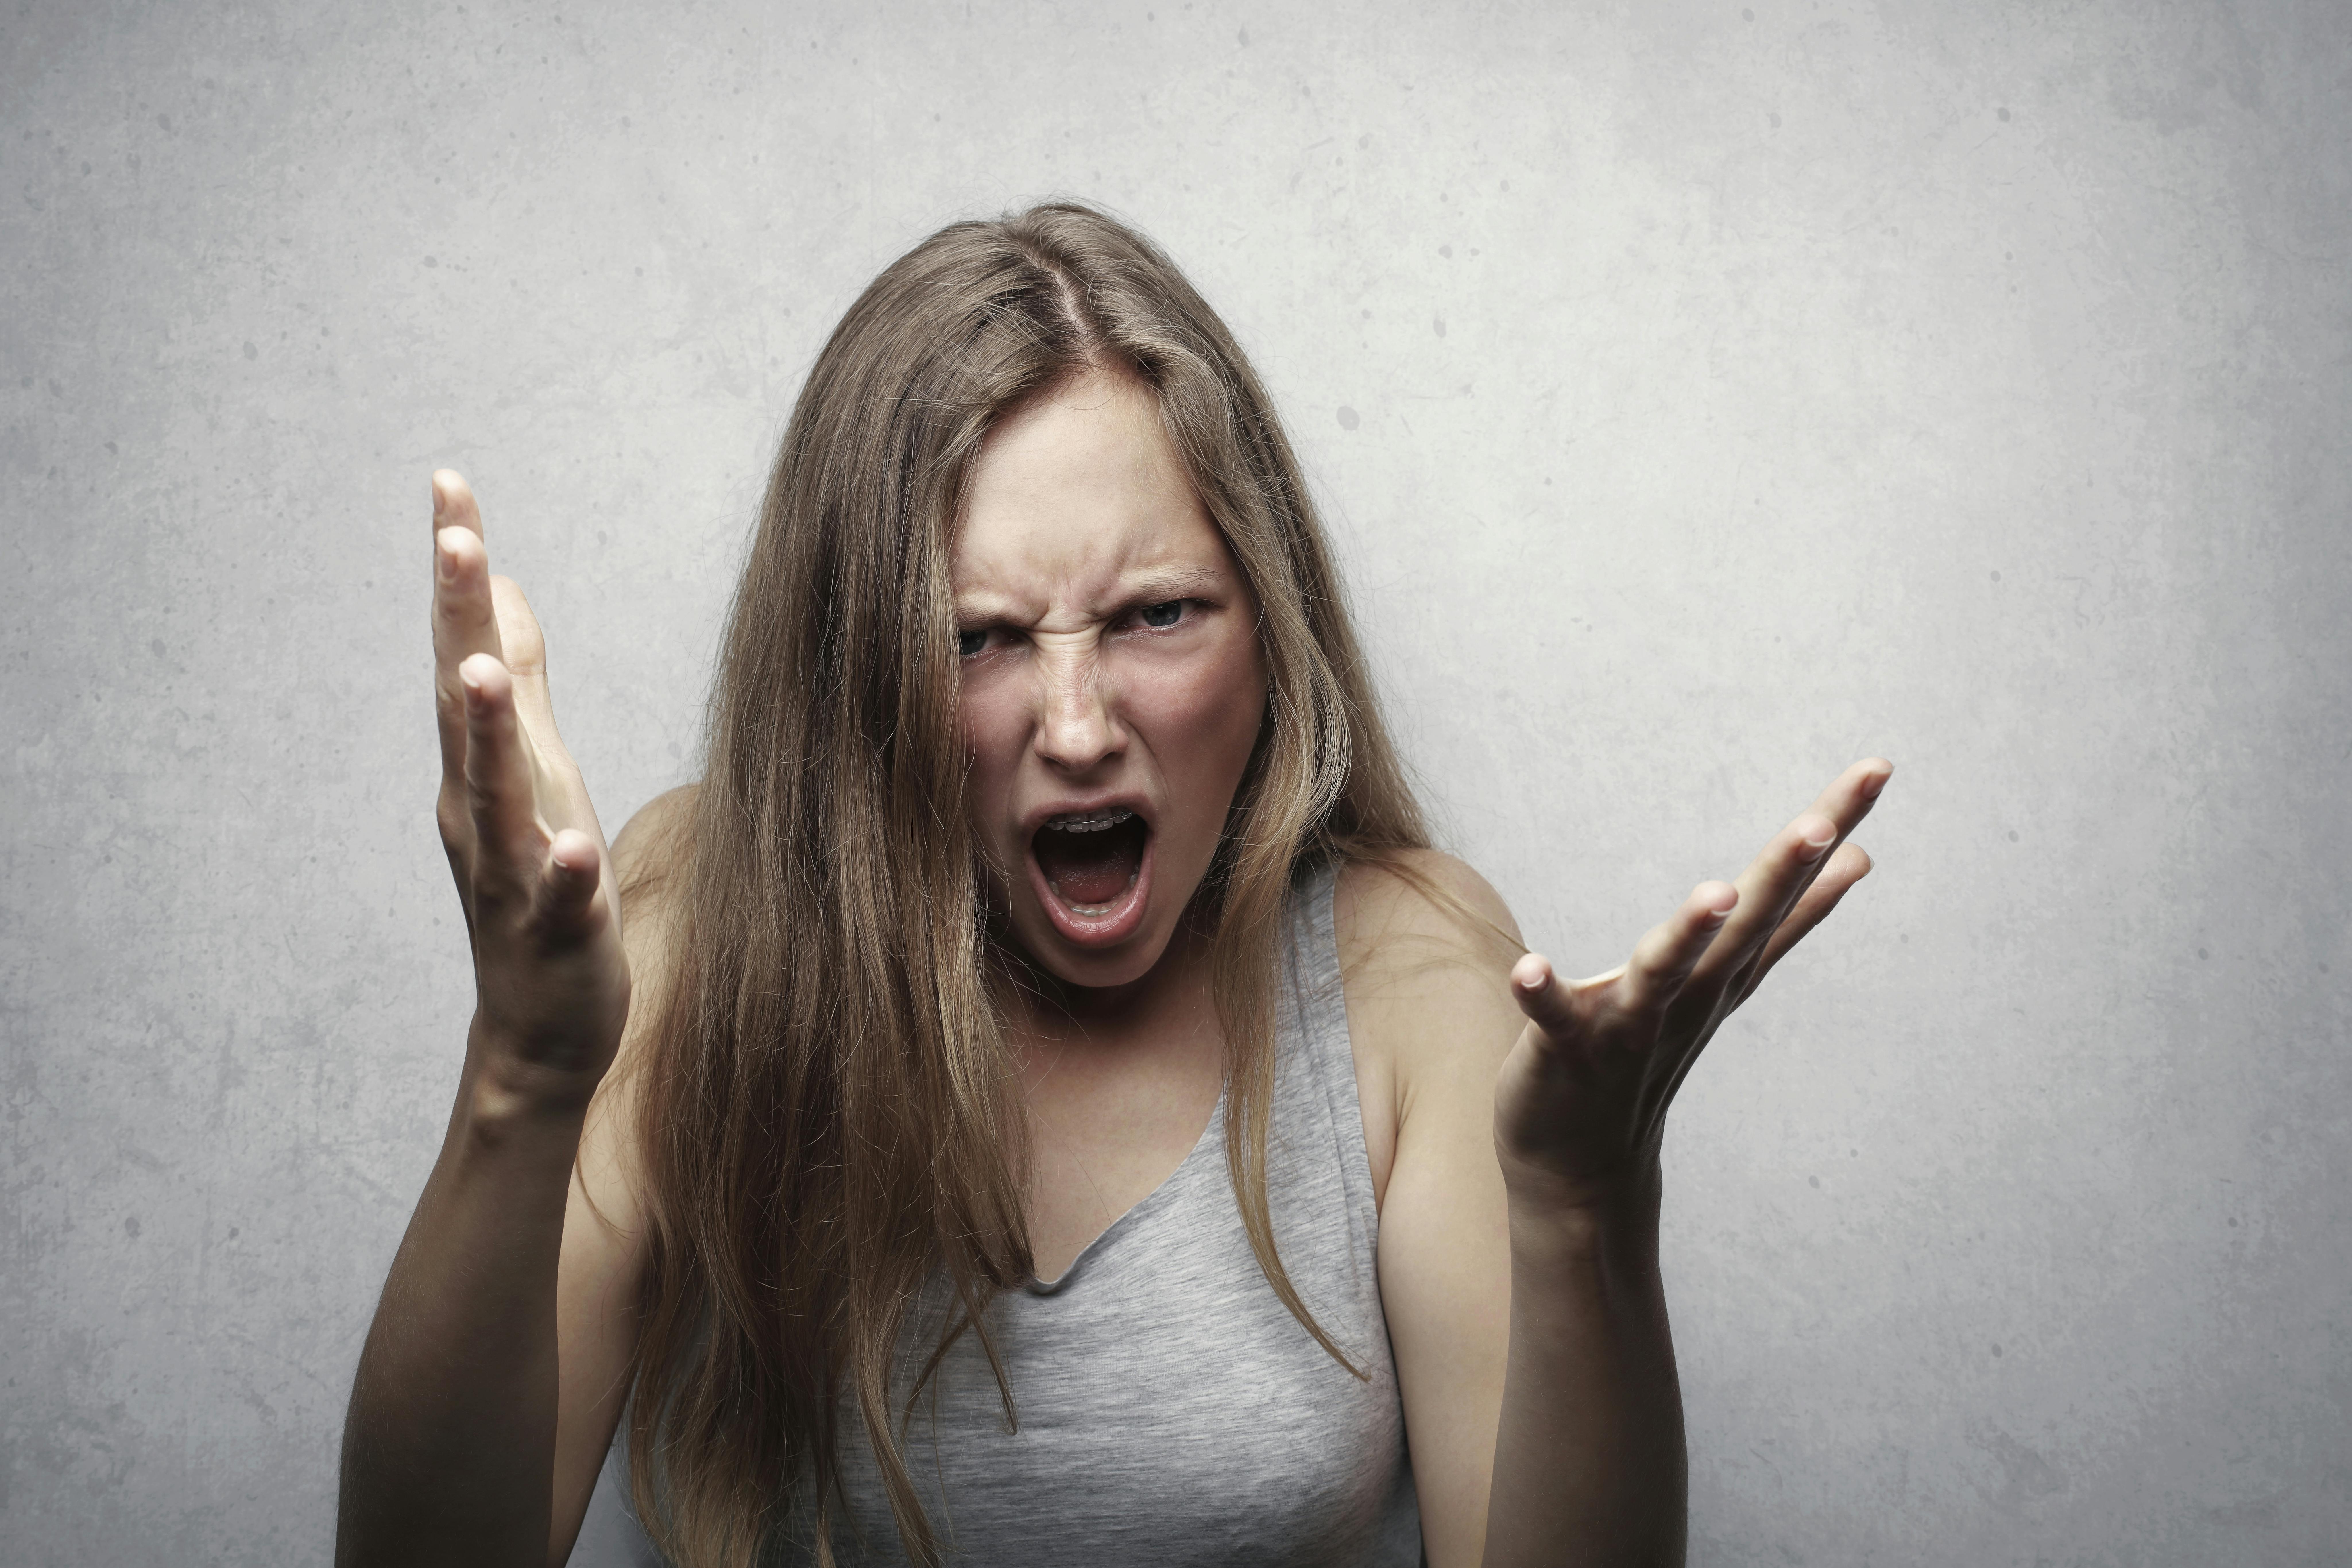 An angry woman in aa grey tank top | Source: Pexels